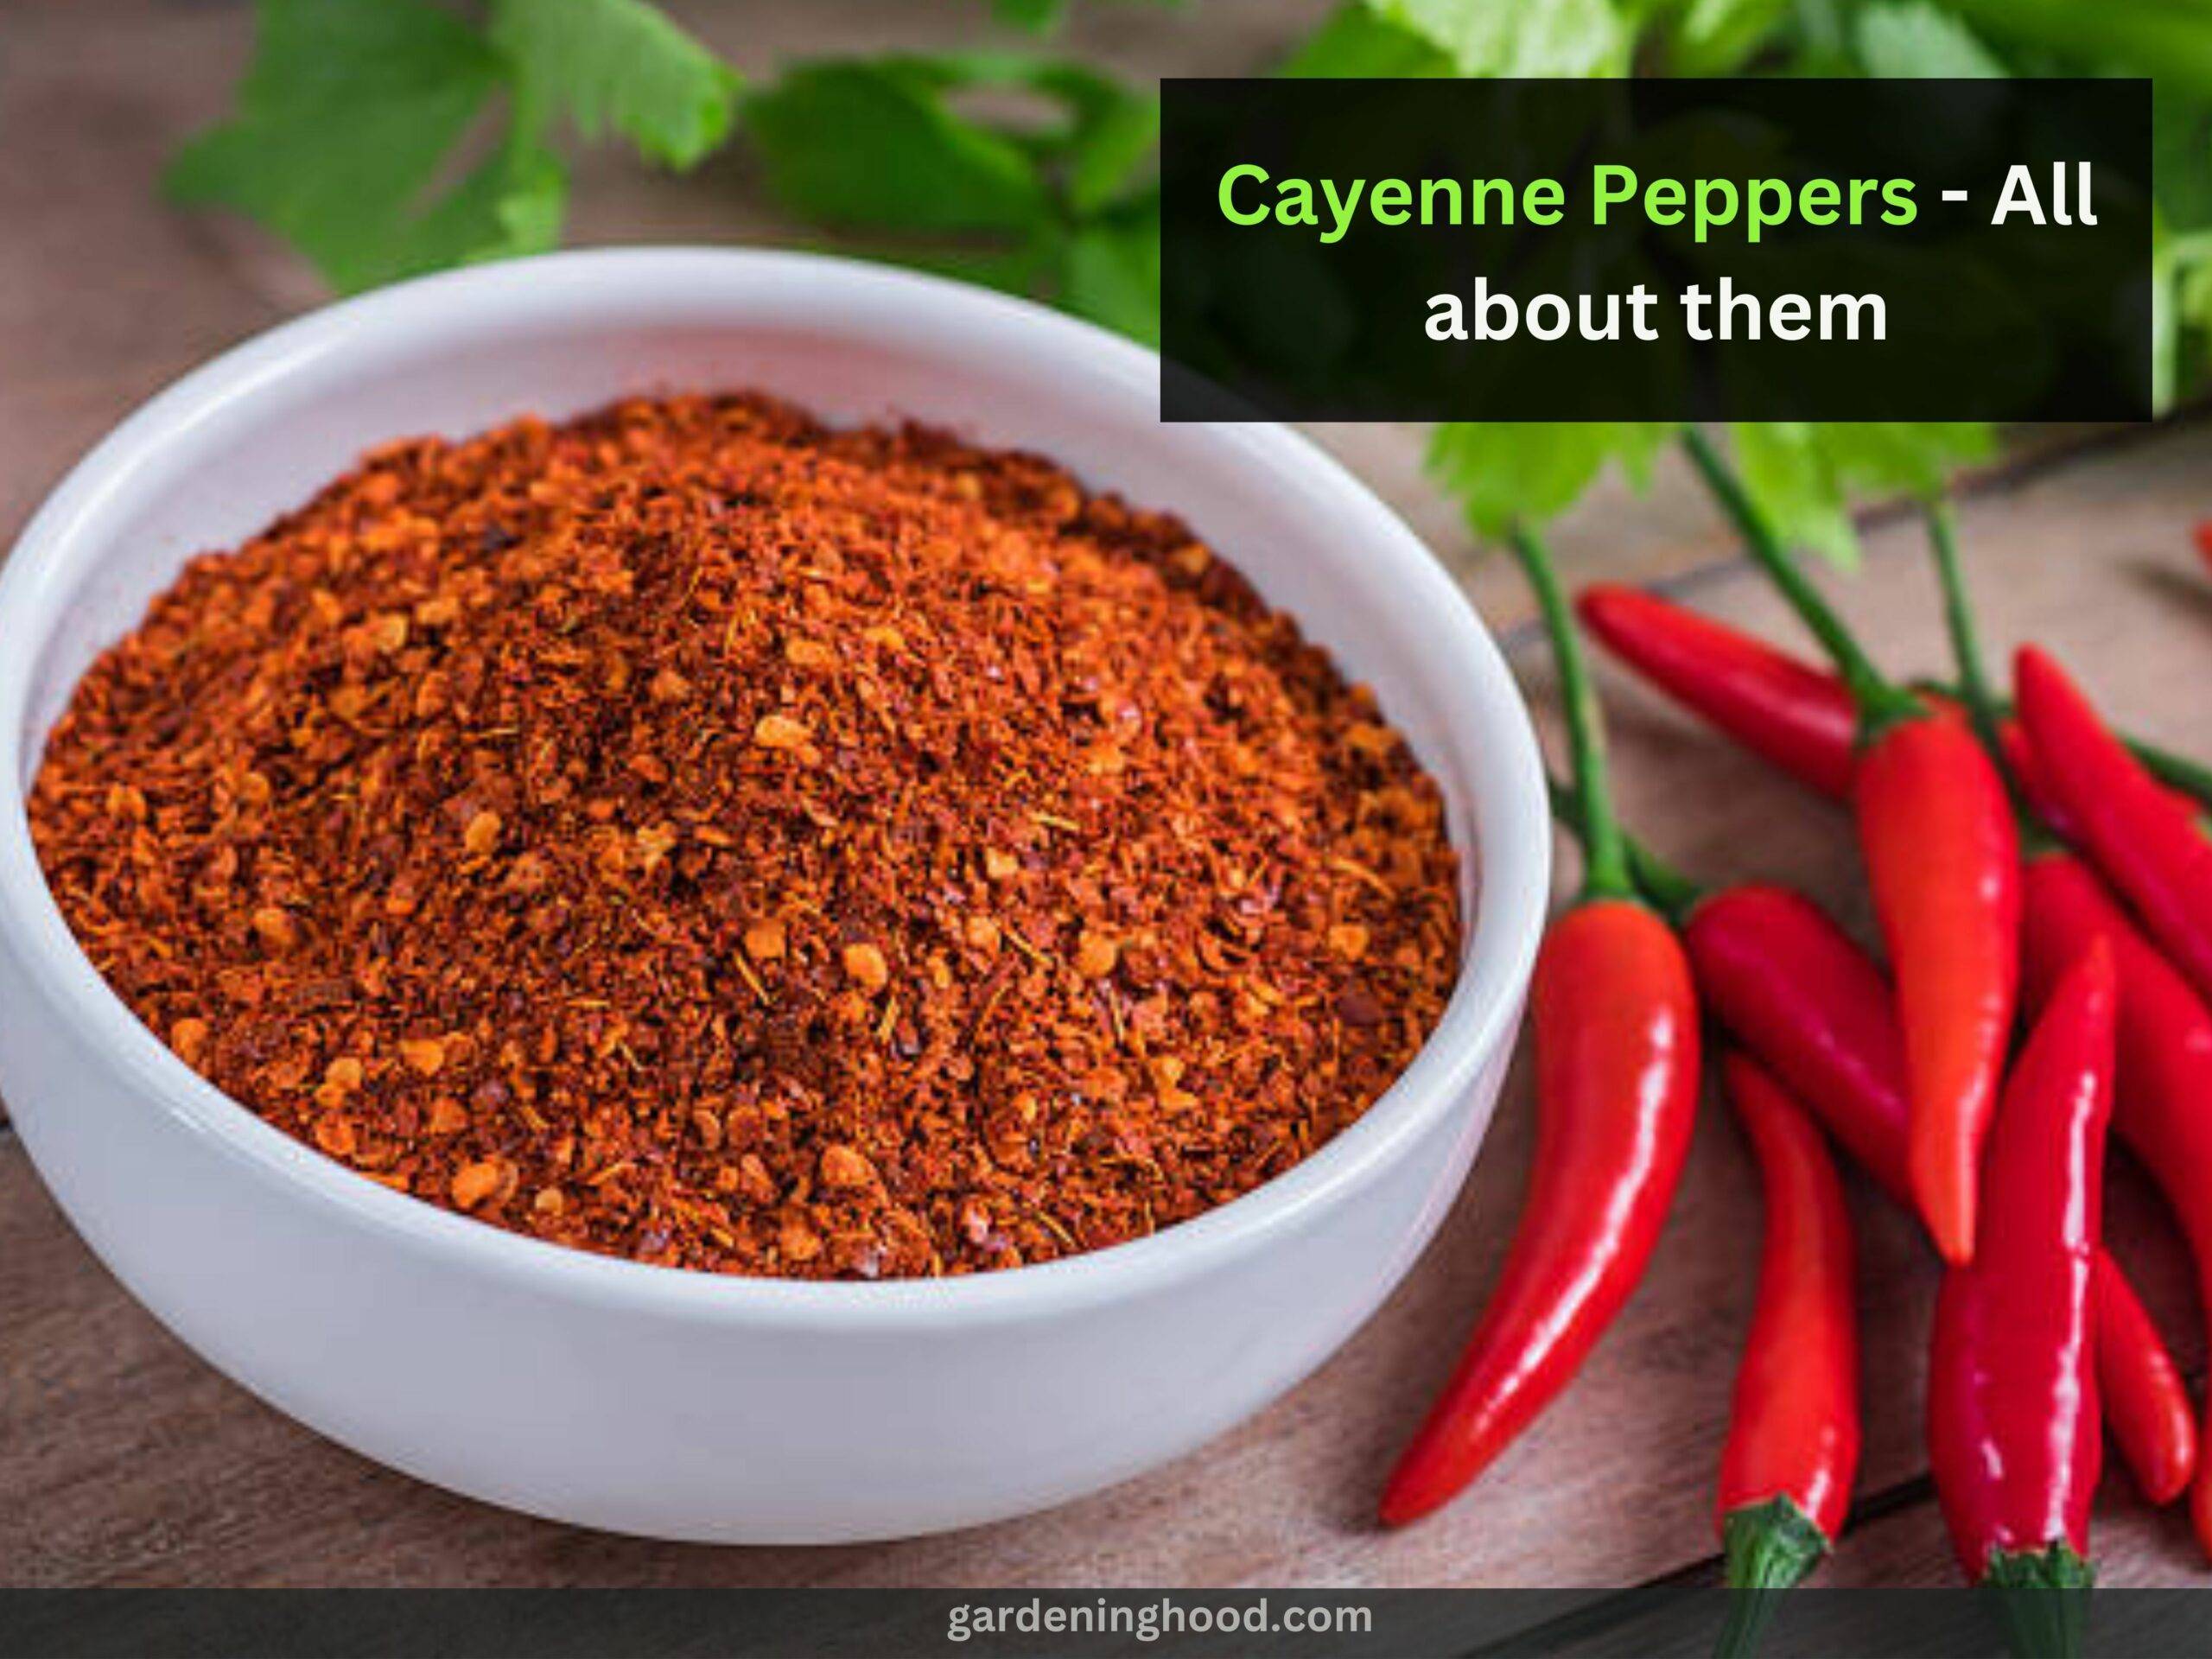 Cayenne Peppers - All about them